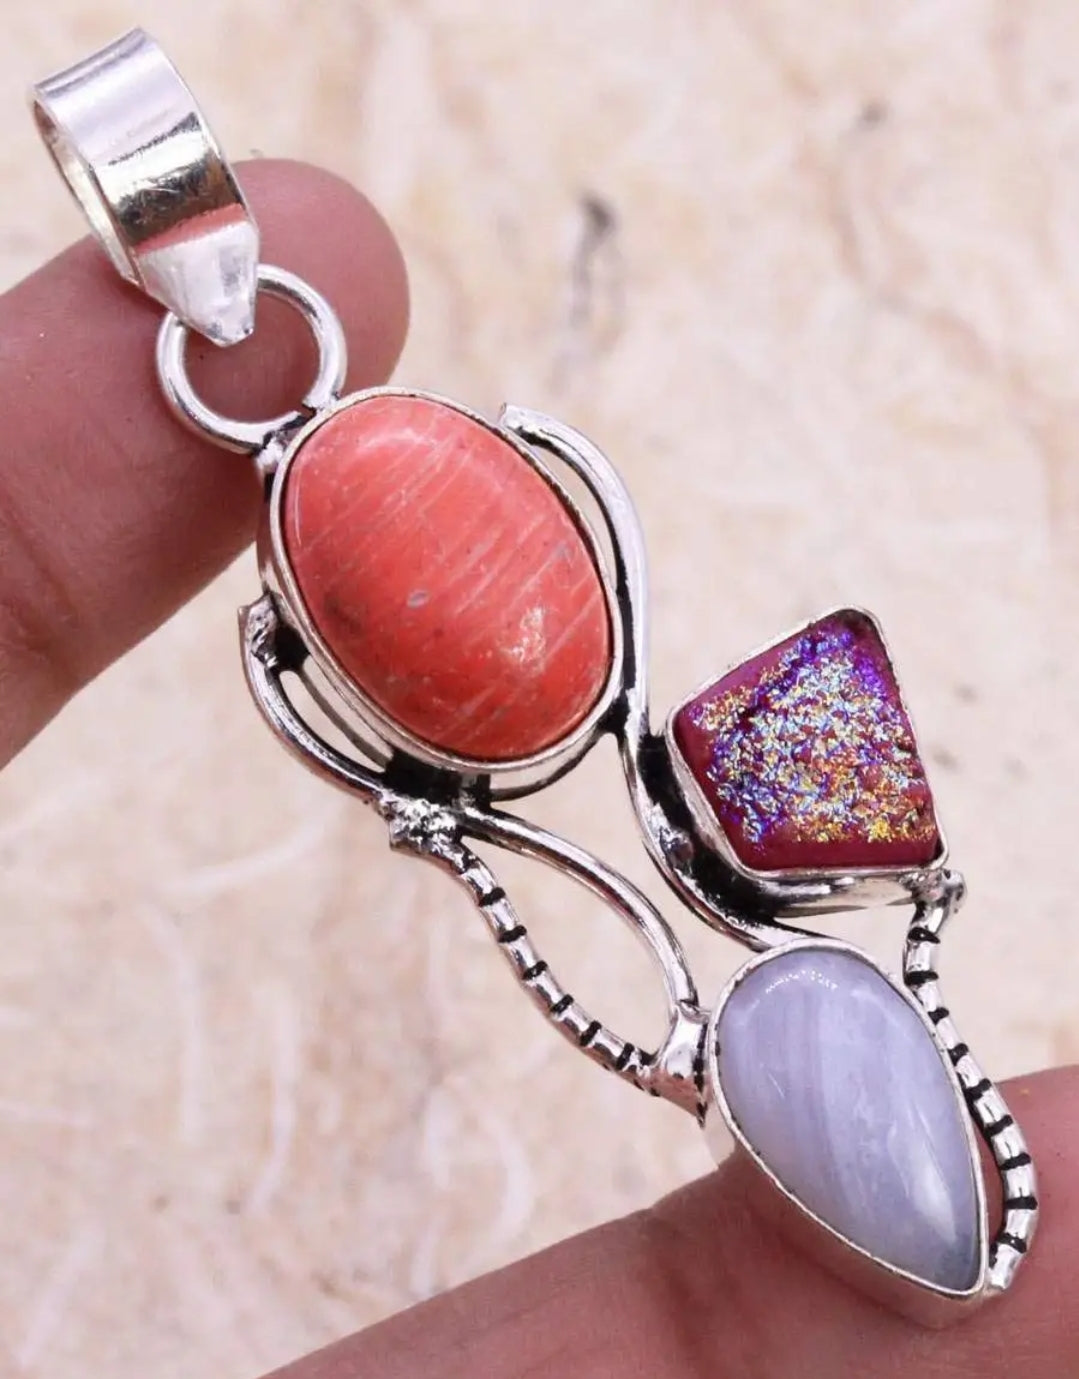 Lace Agate and Titanium Druzy Pendant  - 1.8" Gemstone on Cord and Gift-Boxed